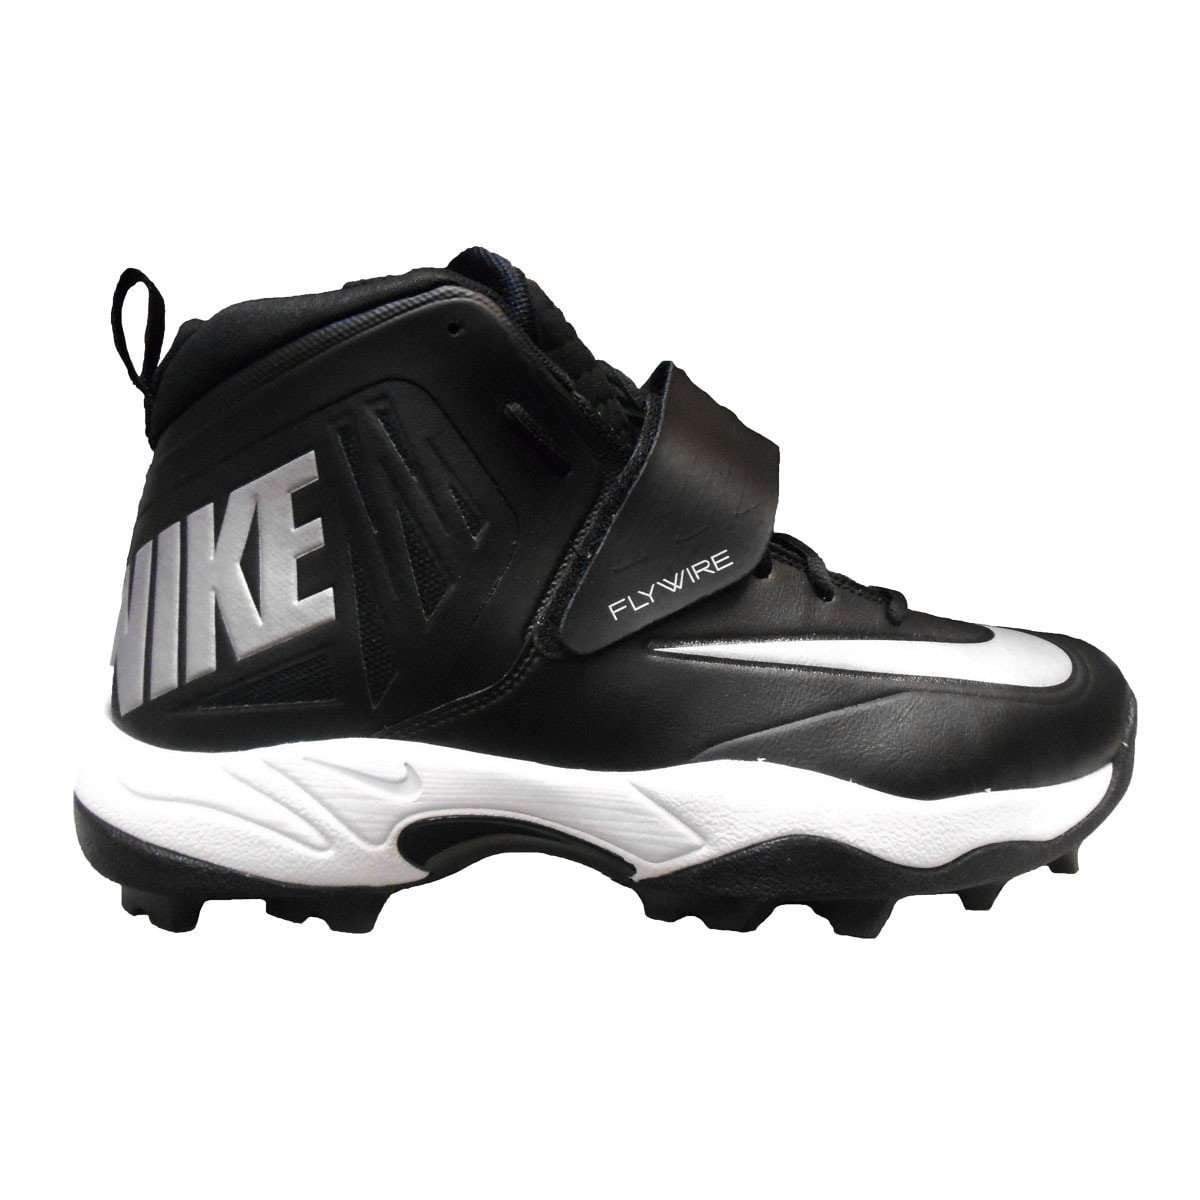 Nike Code Pro Cleats | lupon.gov.ph